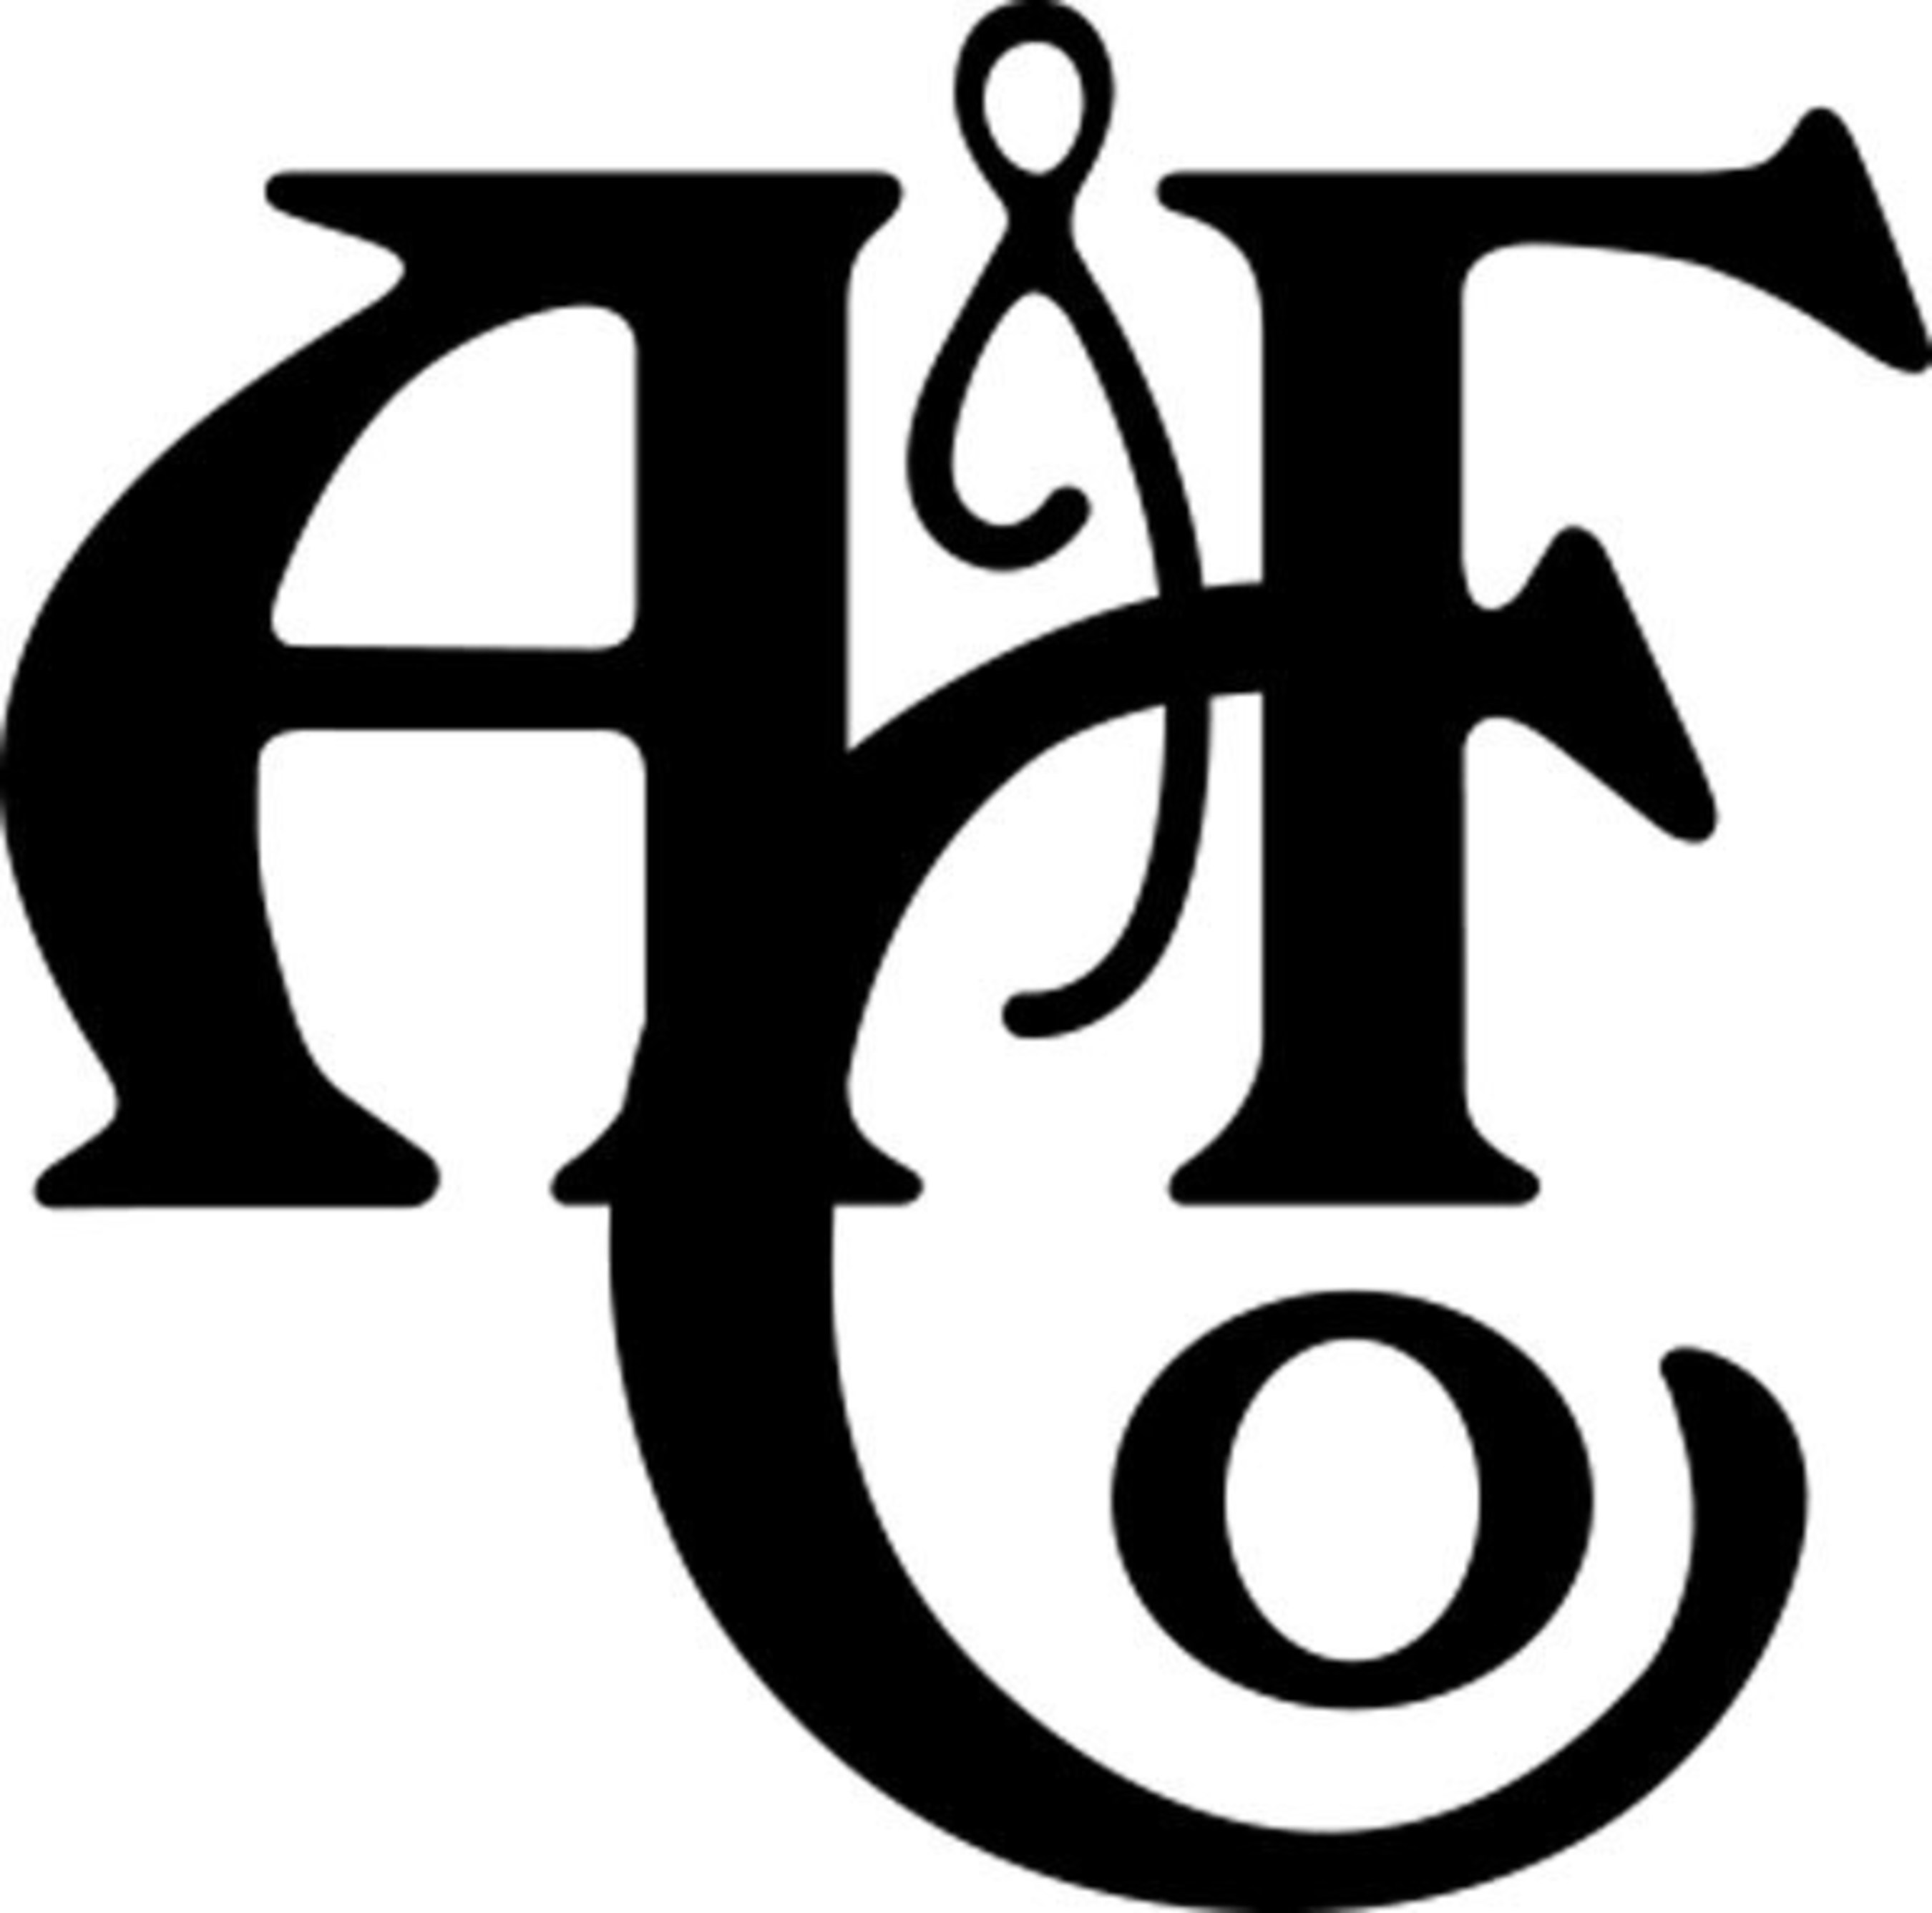 abercrombie and fitch sign